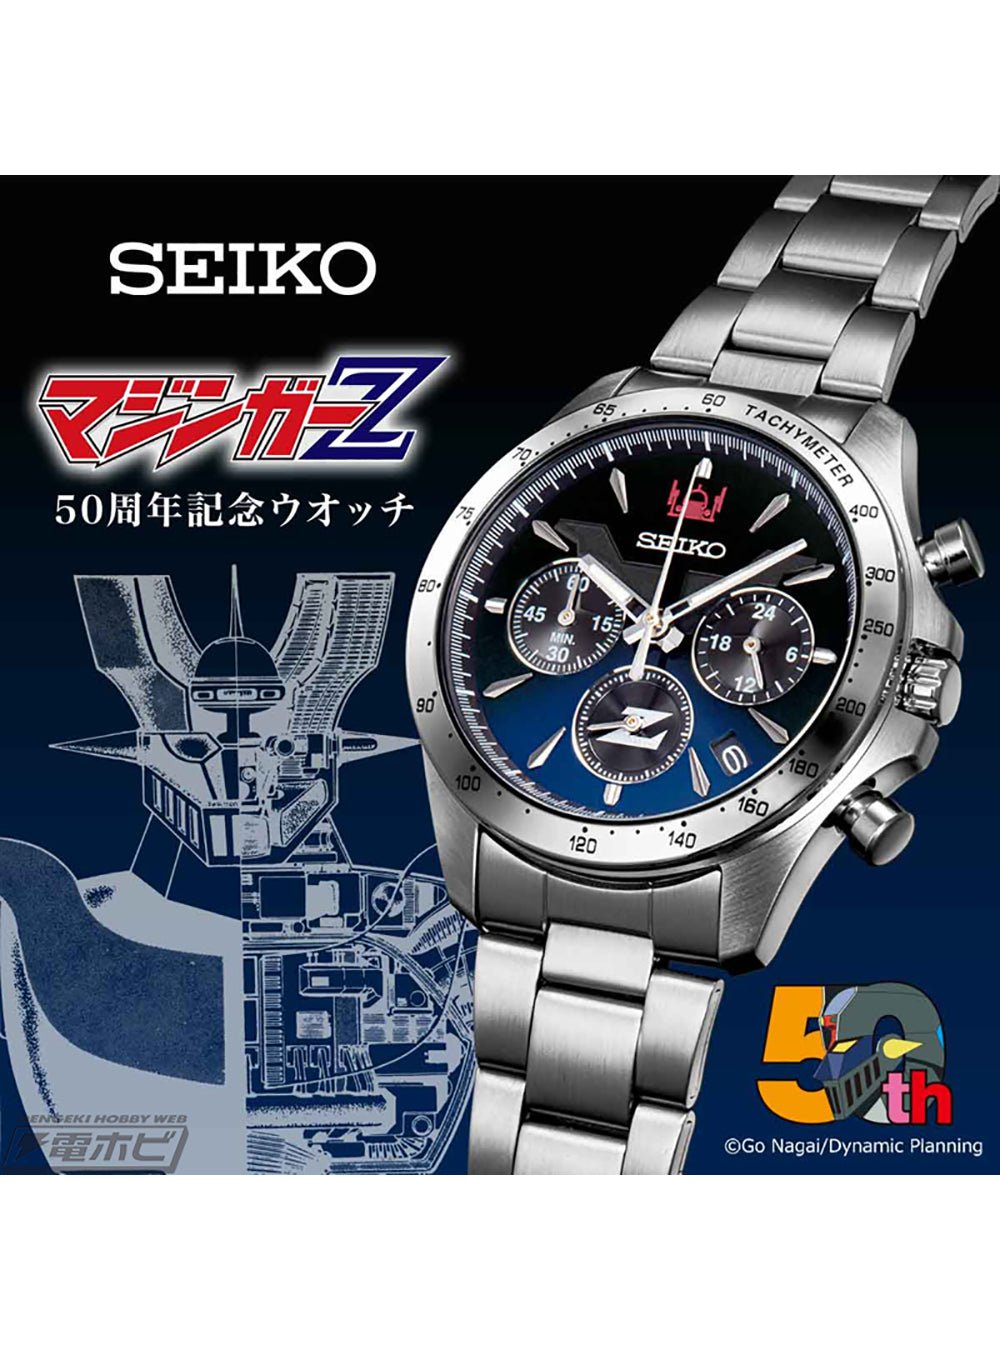 SEIKO x MAZINGER (TRANZOR) Z 50TH ANNIVERSARY WATCH MADE IN JAPAN LIMITED  EDITION